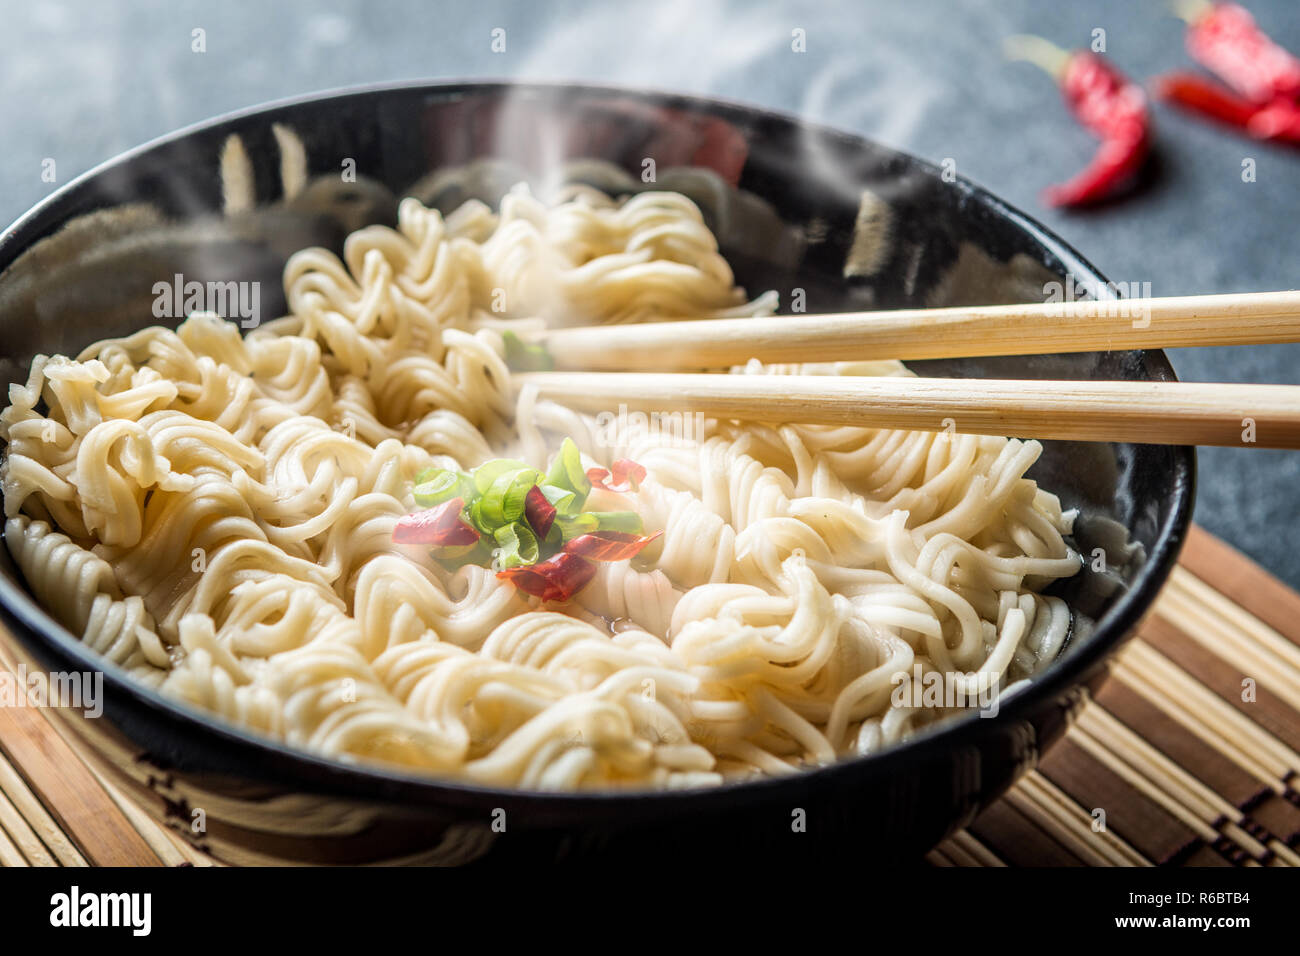 Black bowl of asian instant noodles with hot water and red chili peppers and green onion Stock Photo